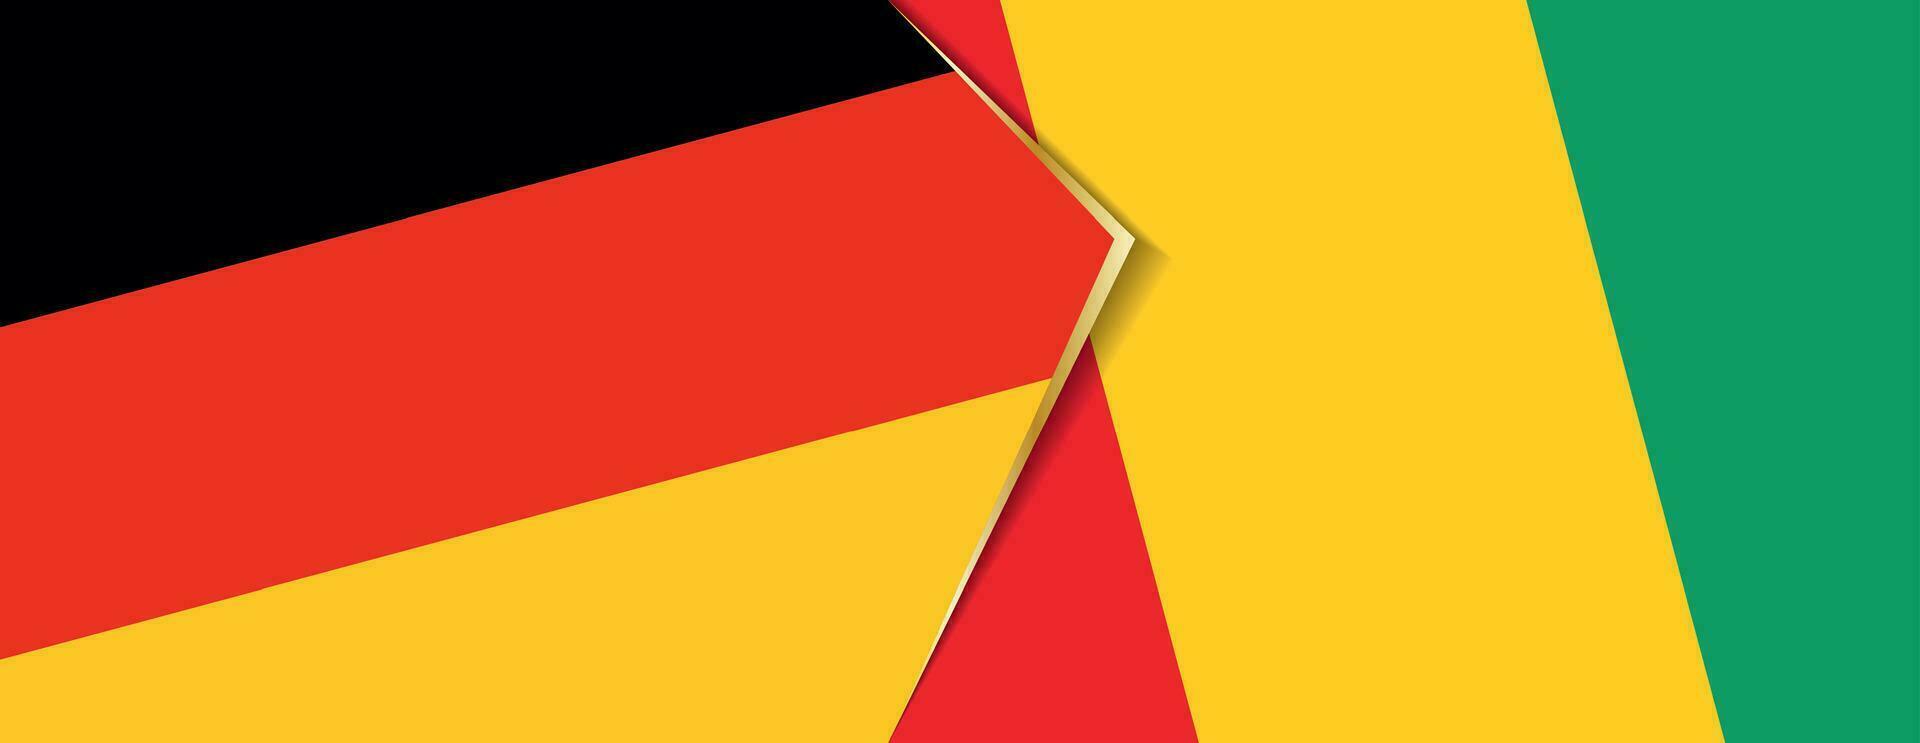 Germany and Guinea flags, two vector flags.